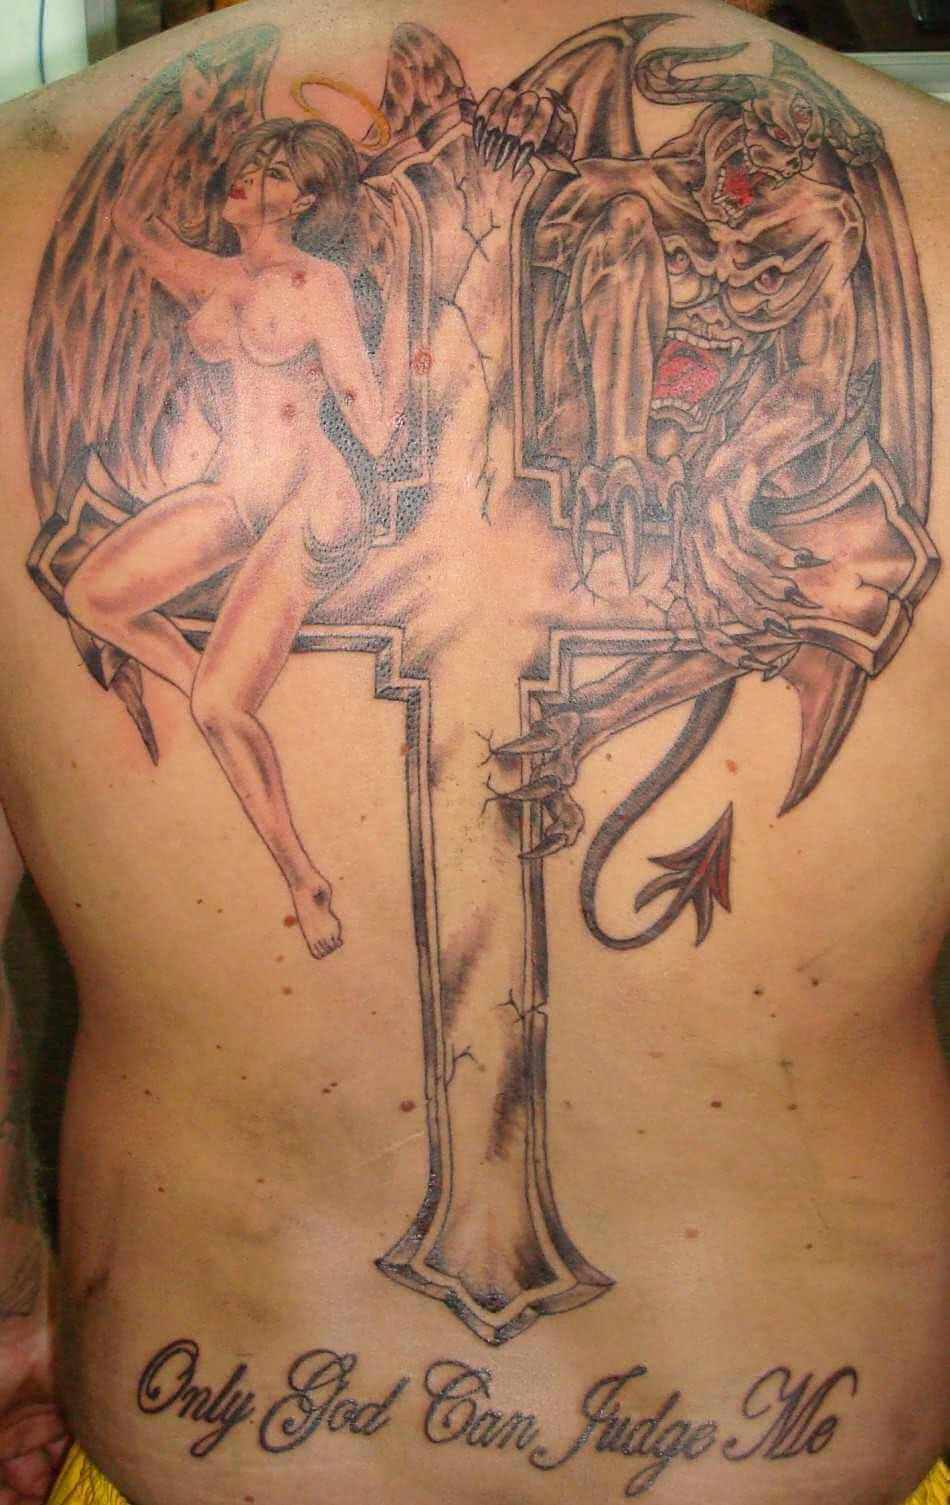 Tattoo Only god can judge me